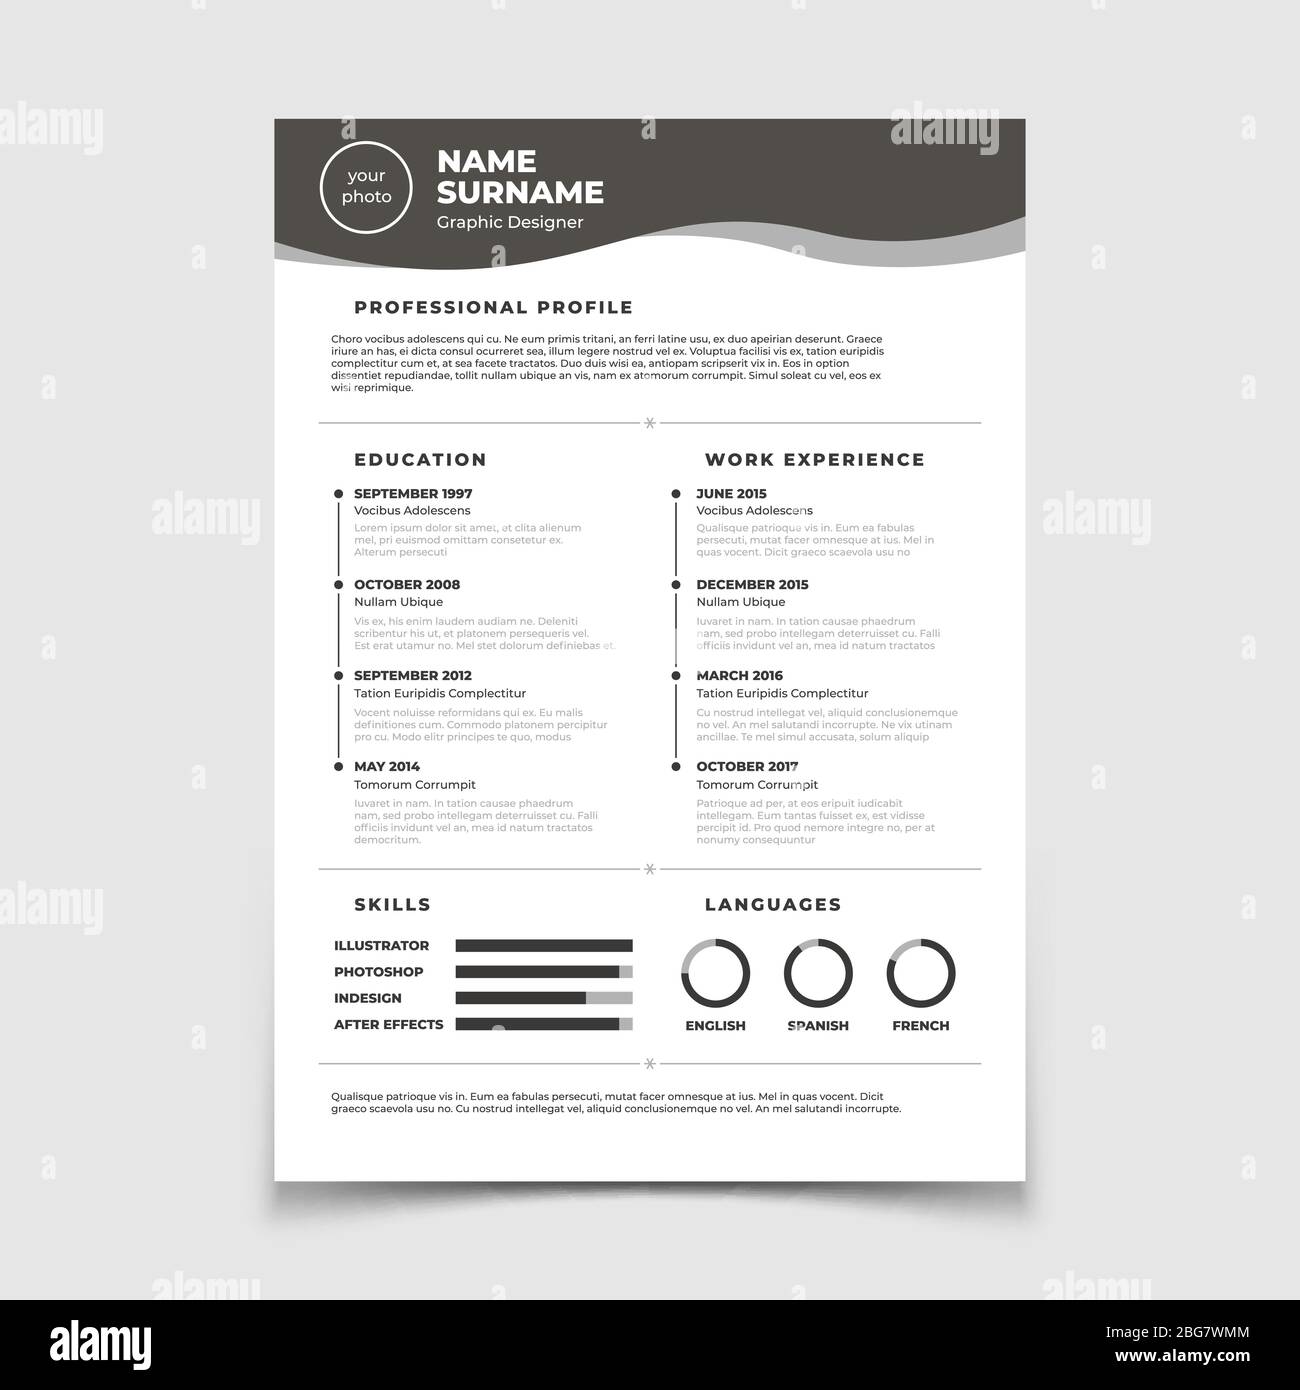 Cv resume. Document for employment interview. Vector business design template. Resume for interview in company corporate illustration Stock Vector